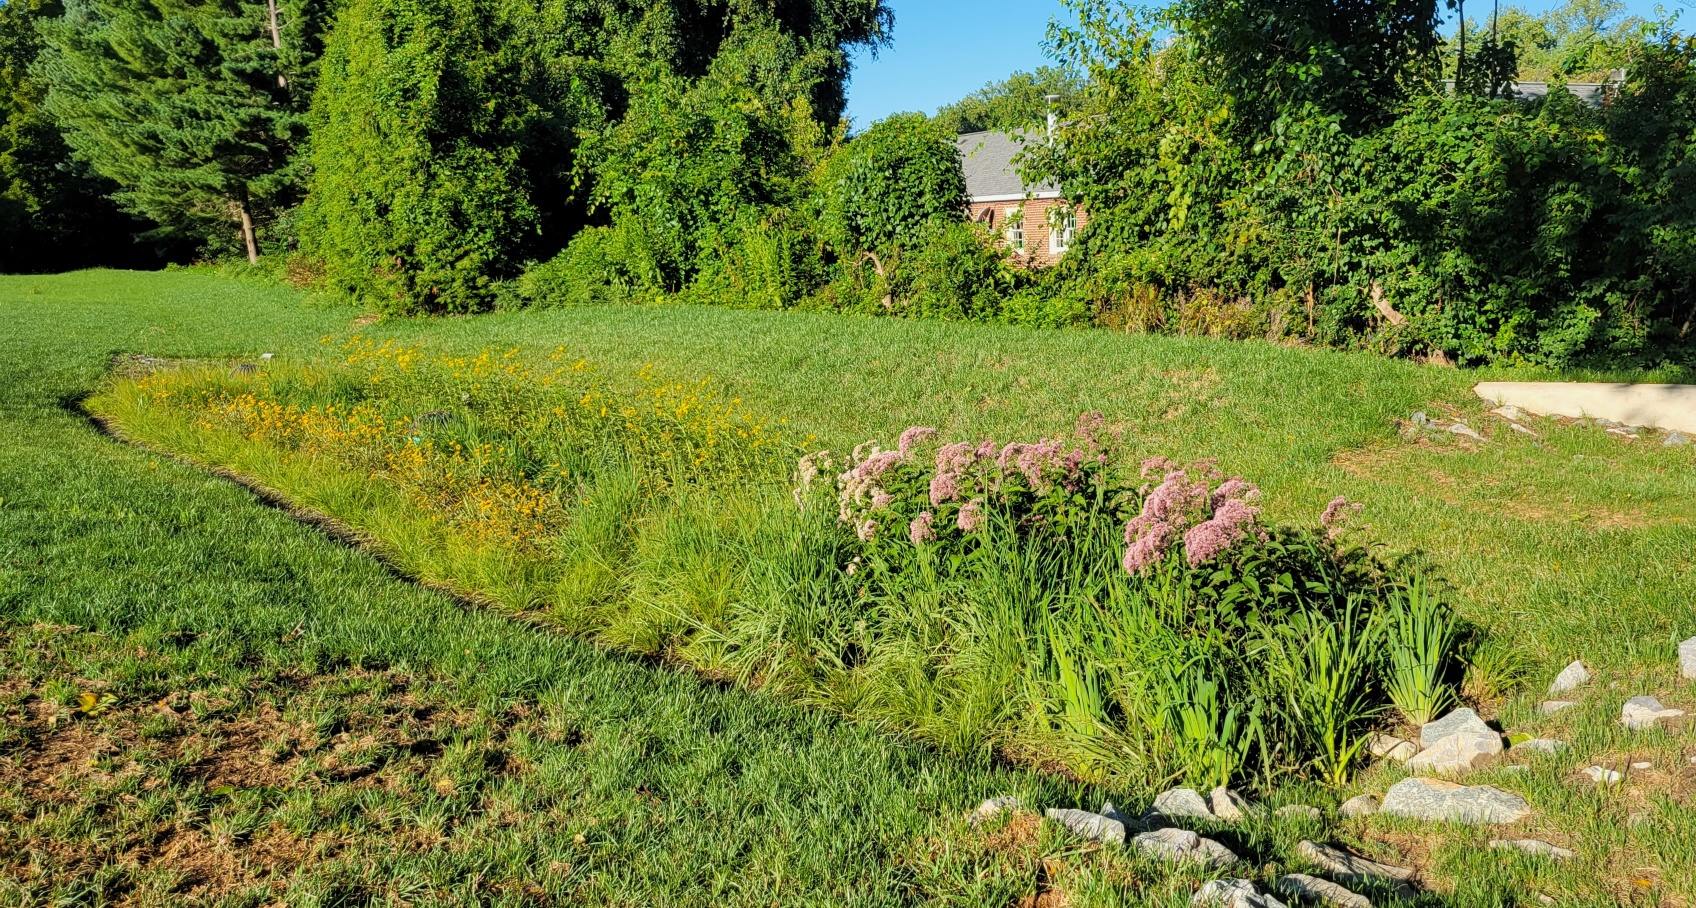 A picture of a stormwater facility with different grasses and flowering plants.